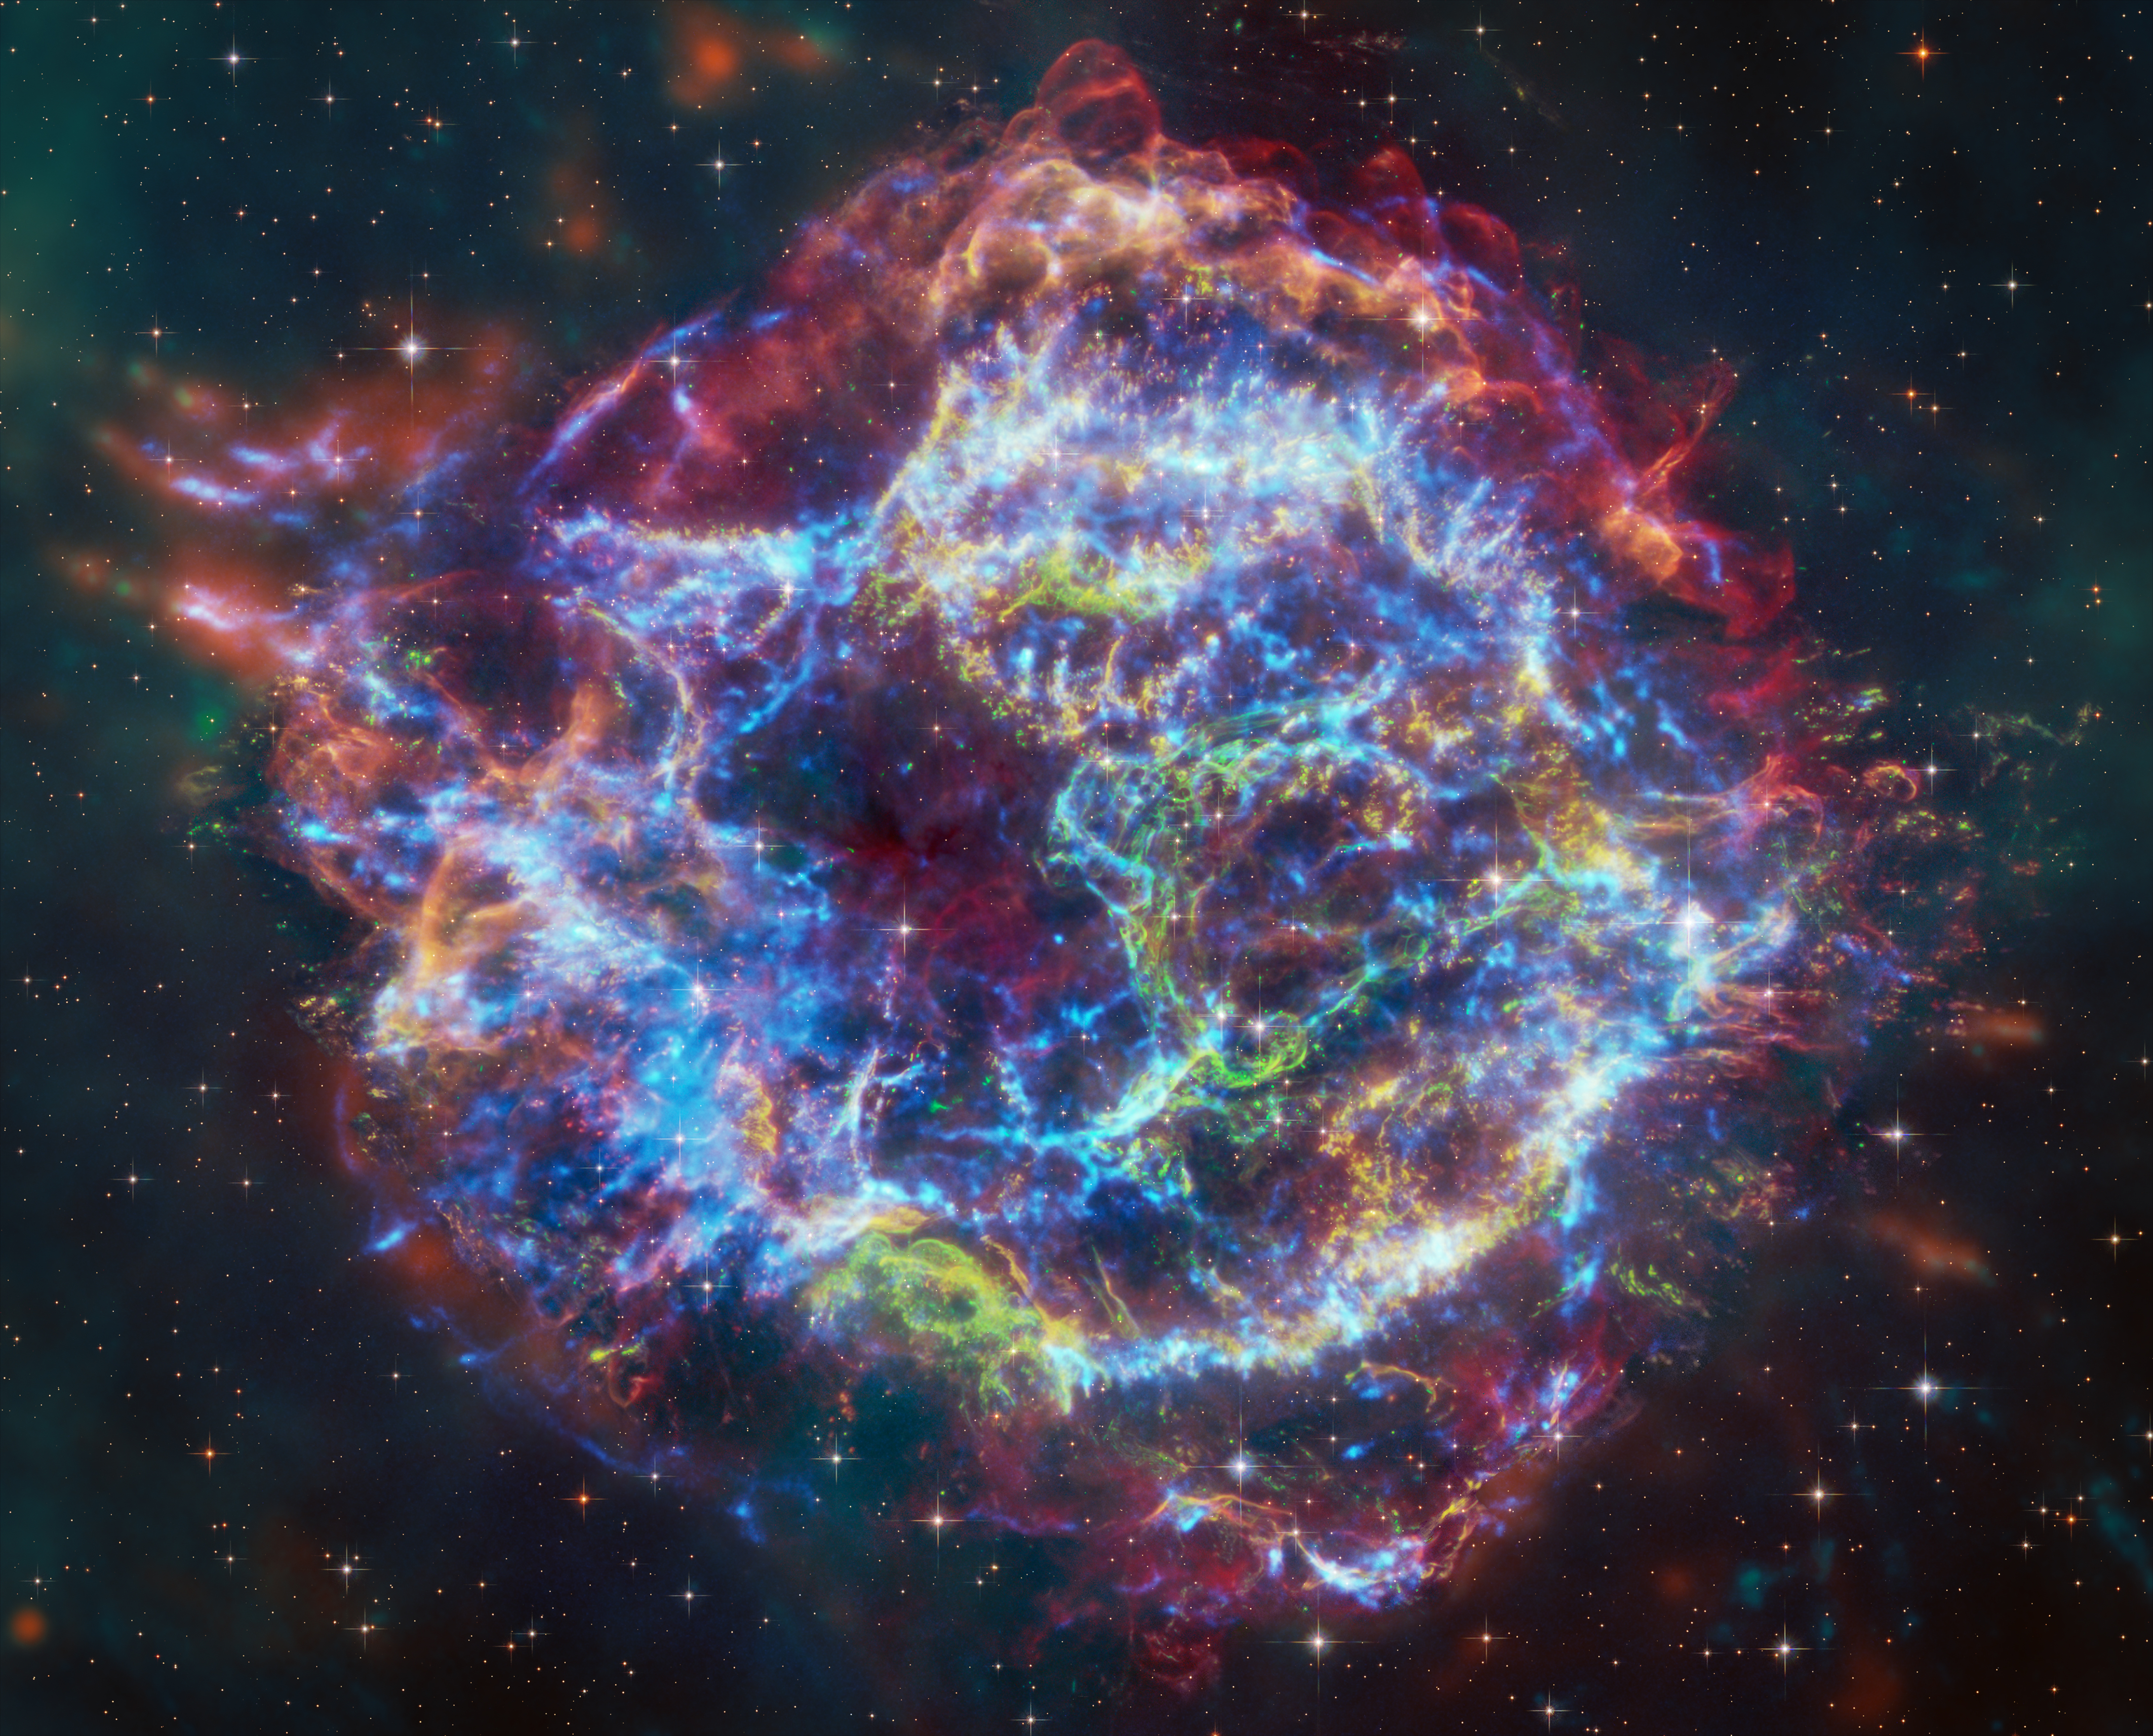 This image of Cassiopeia A resembles a disk of electric light with red clouds, glowing white streaks, red and orange flames, and an area near the center of the remnant resembling a somewhat circular region of green lightning. X-rays from Chandra are blue and reveal hot gas, mostly from supernova debris from the destroyed star, and include elements like silicon and iron. X-rays are also present as thin arcs in the outer regions of the remnant. Infrared data from Webb is red, green, and blue. Webb highlights infrared emission from dust that is warmed up because it is embedded in the hot gas seen by Chandra, and from much cooler supernova debris. Hubble data shows a multitude of stars that permeate the field of view.